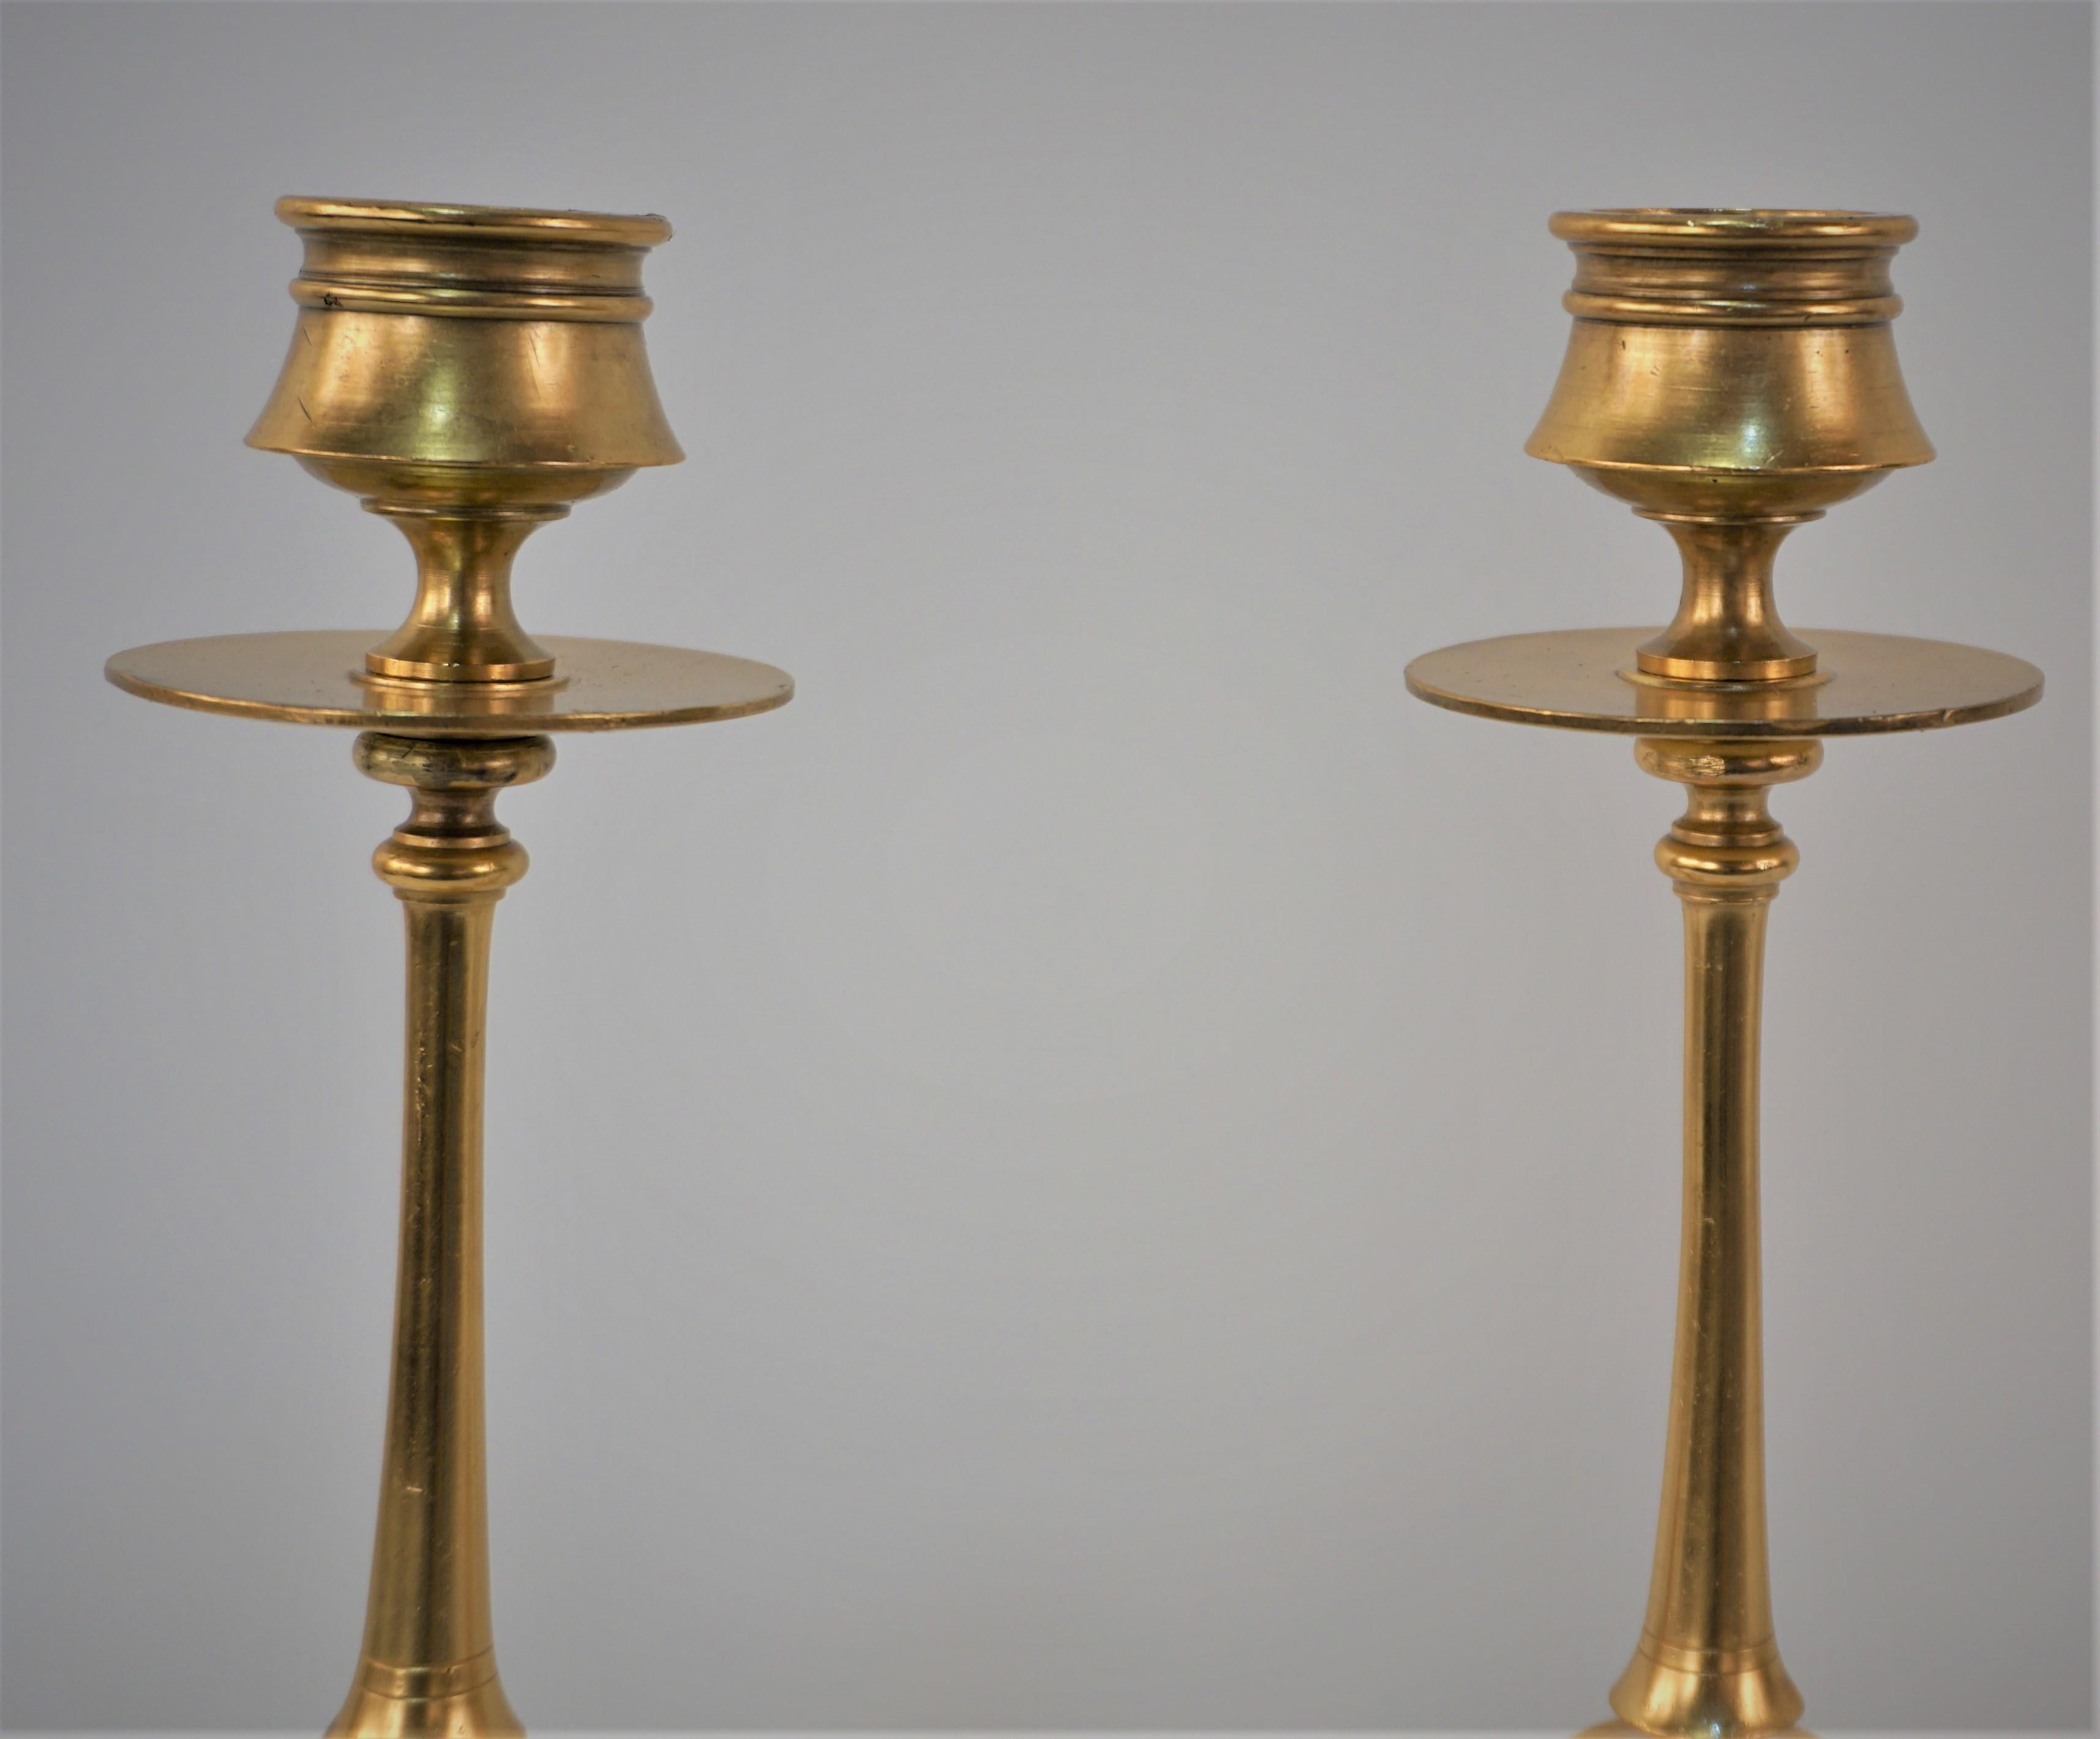 Pair of Early 20th Century Gilt Bronze Candlesticks In Good Condition For Sale In Fairfax, VA